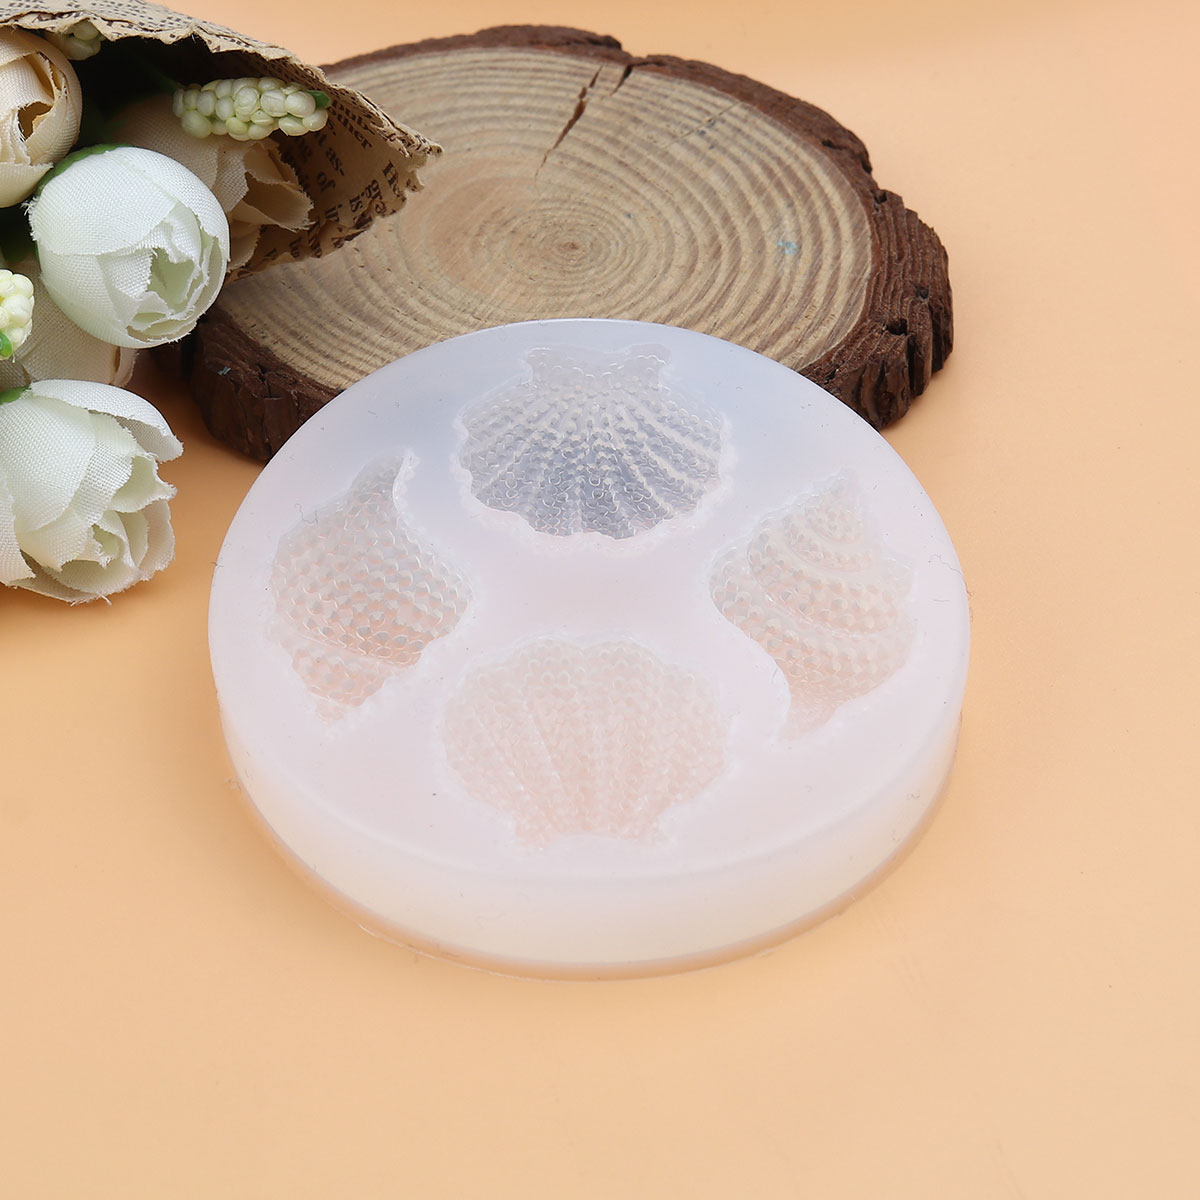 Picture of Silicone Resin Mold For Jewelry Making Round White Shell 7cm Dia., 1 Piece